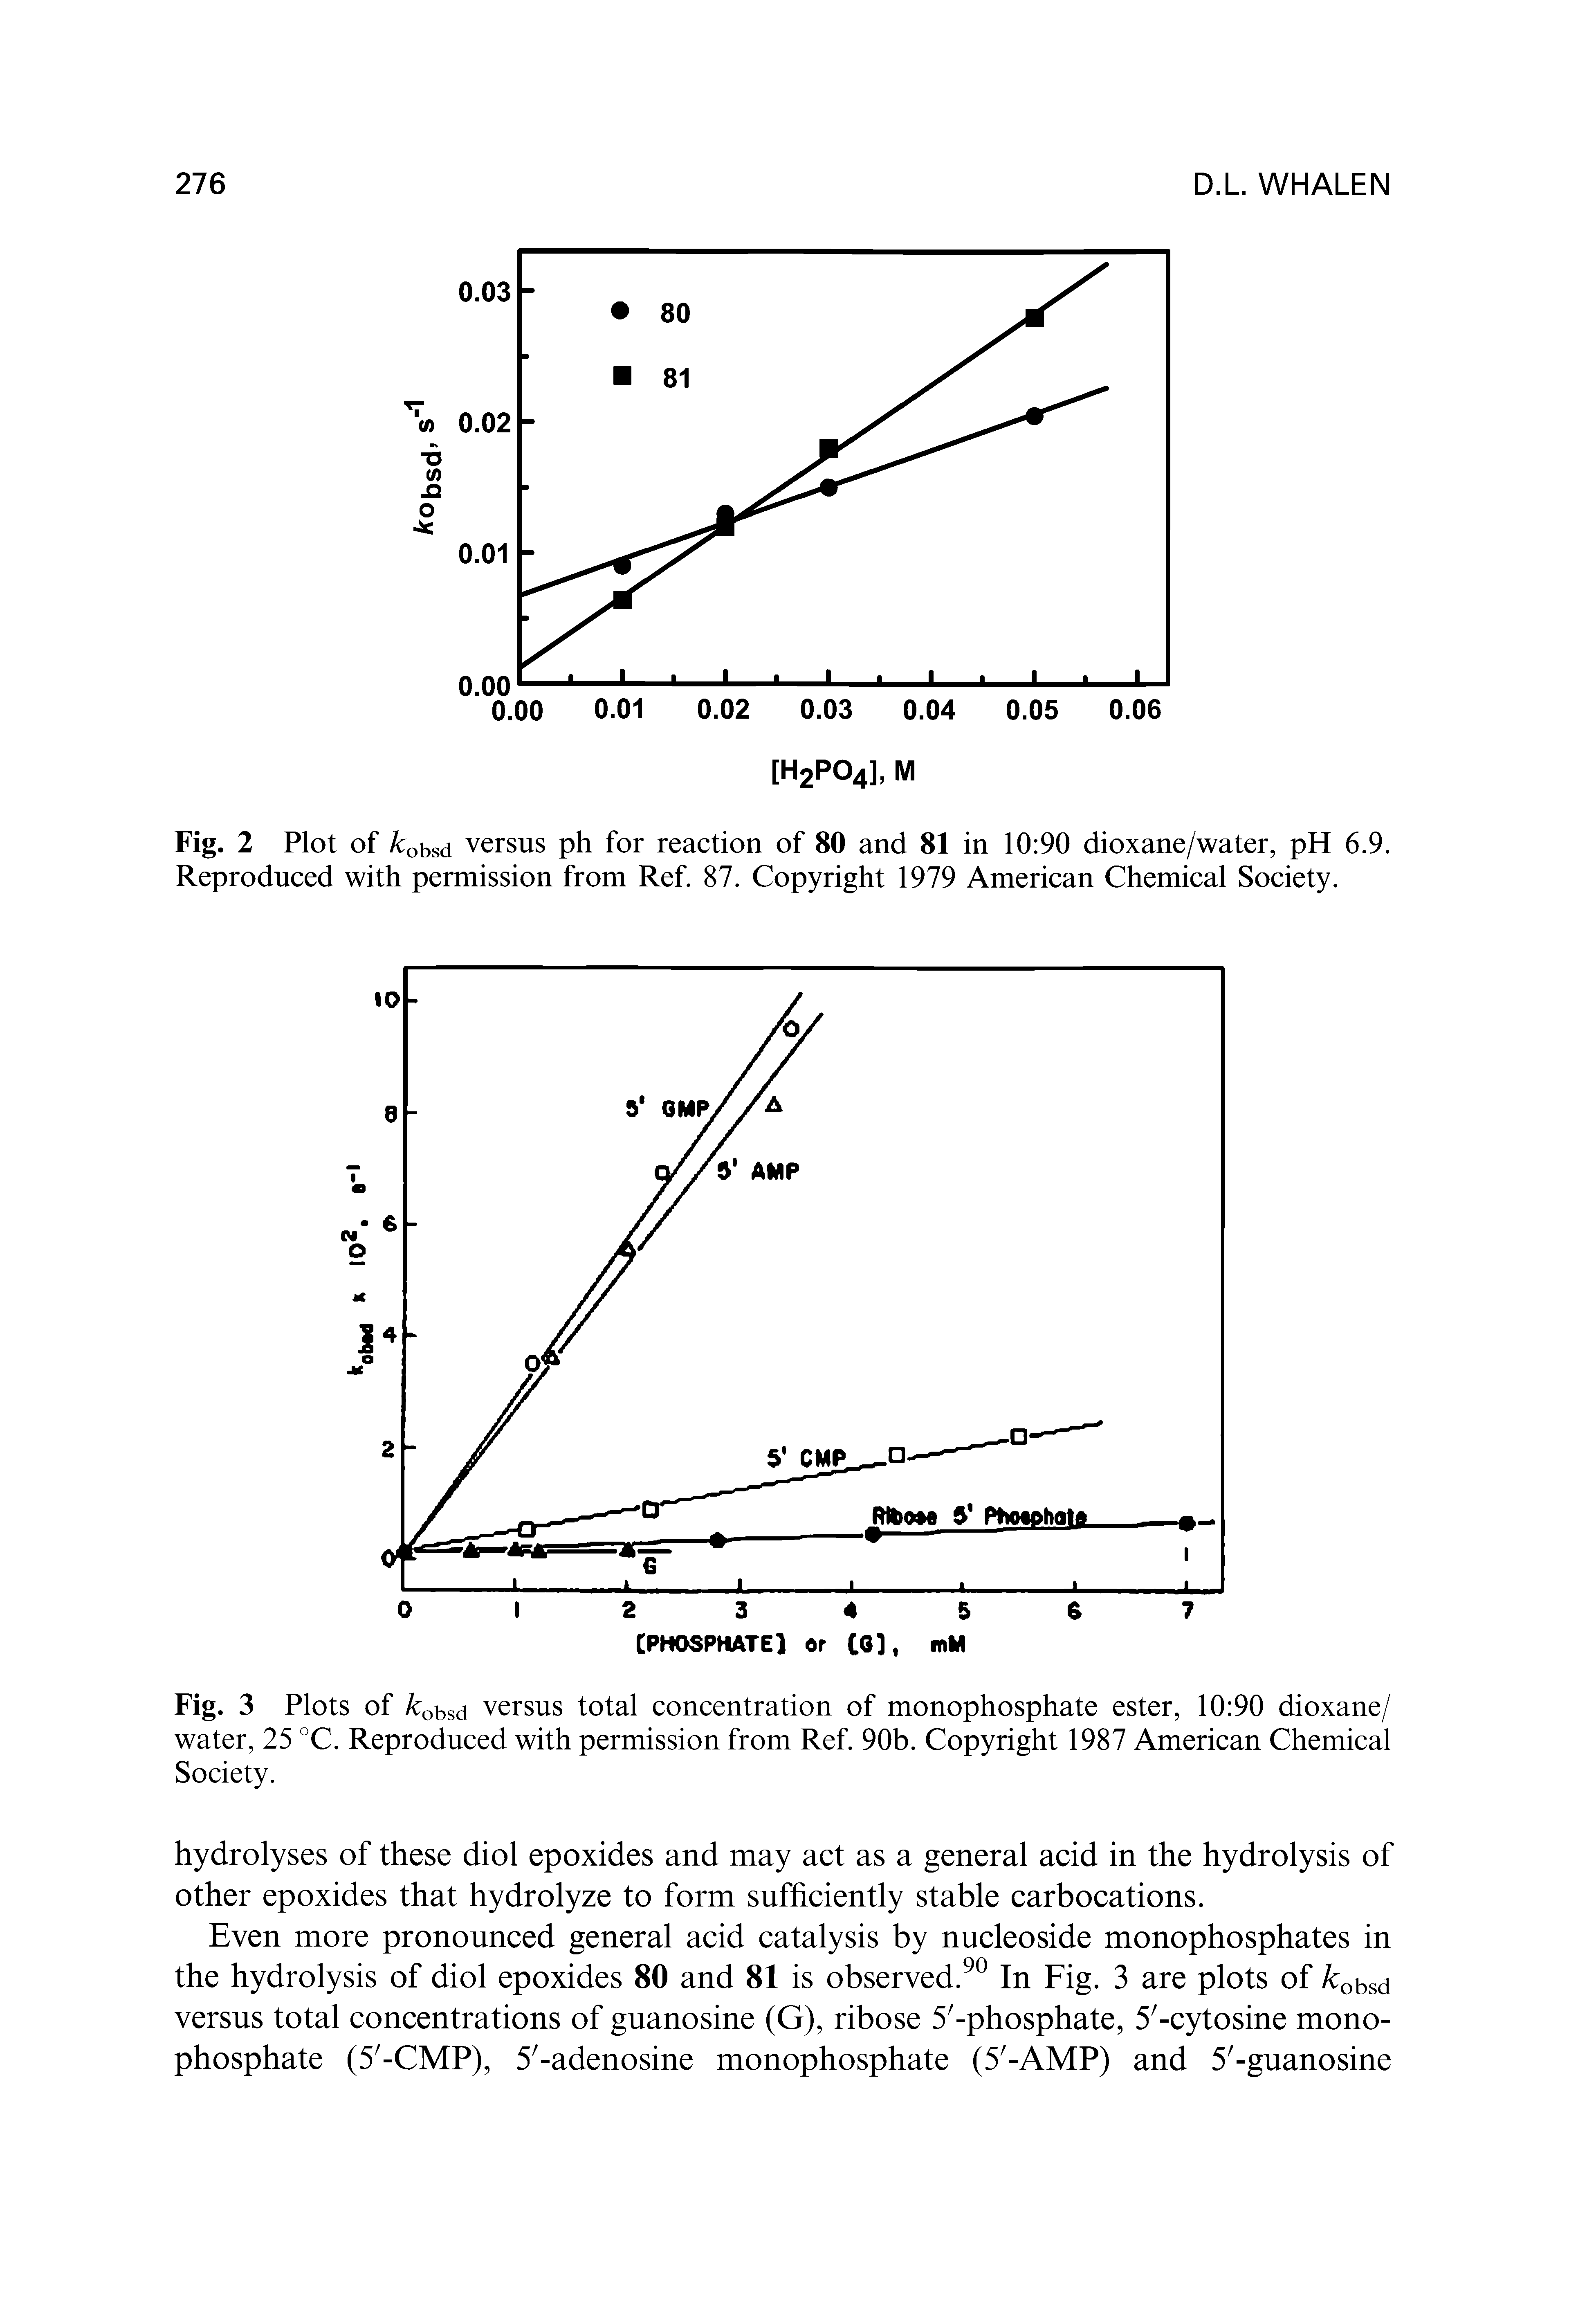 Fig. 3 Plots of k0bSd versus total concentration of monophosphate ester, 10 90 dioxane/ water, 25 °C. Reproduced with permission from Ref. 90b. Copyright 1987 American Chemical Society.